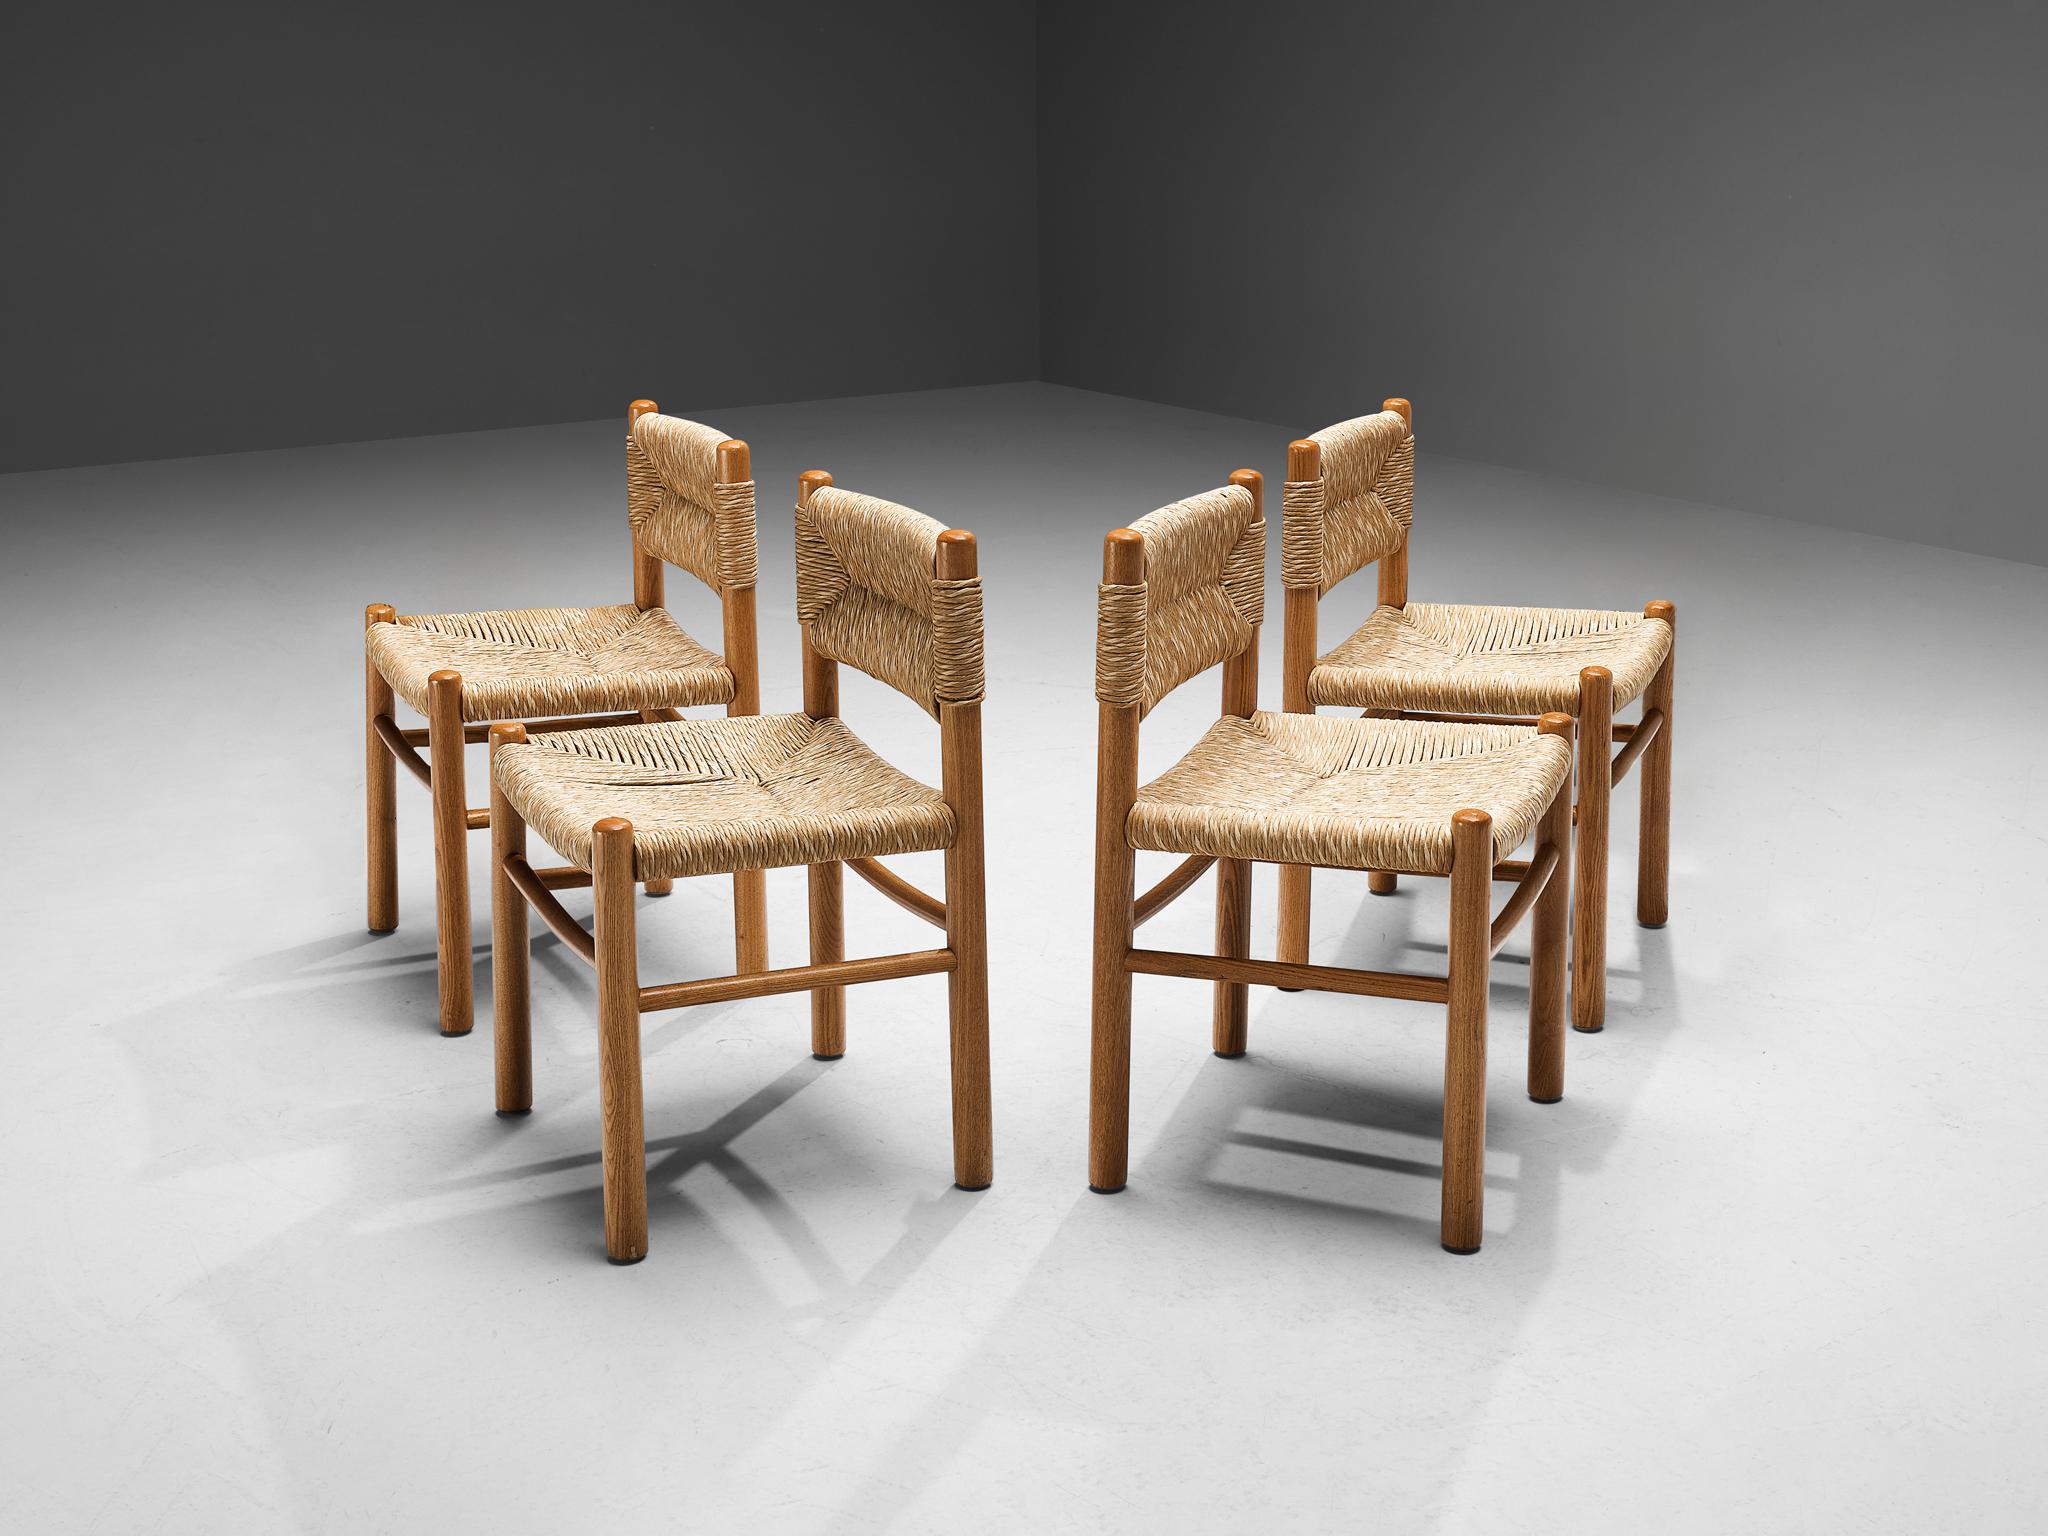 Set of four dining chairs, oak, straw, France, 1960s.

This set of dining chairs features a solid wooden frame, consisting of cylindrical thick legs that are connected to each other with elegant slim horizontal slats. The seats and backrests are